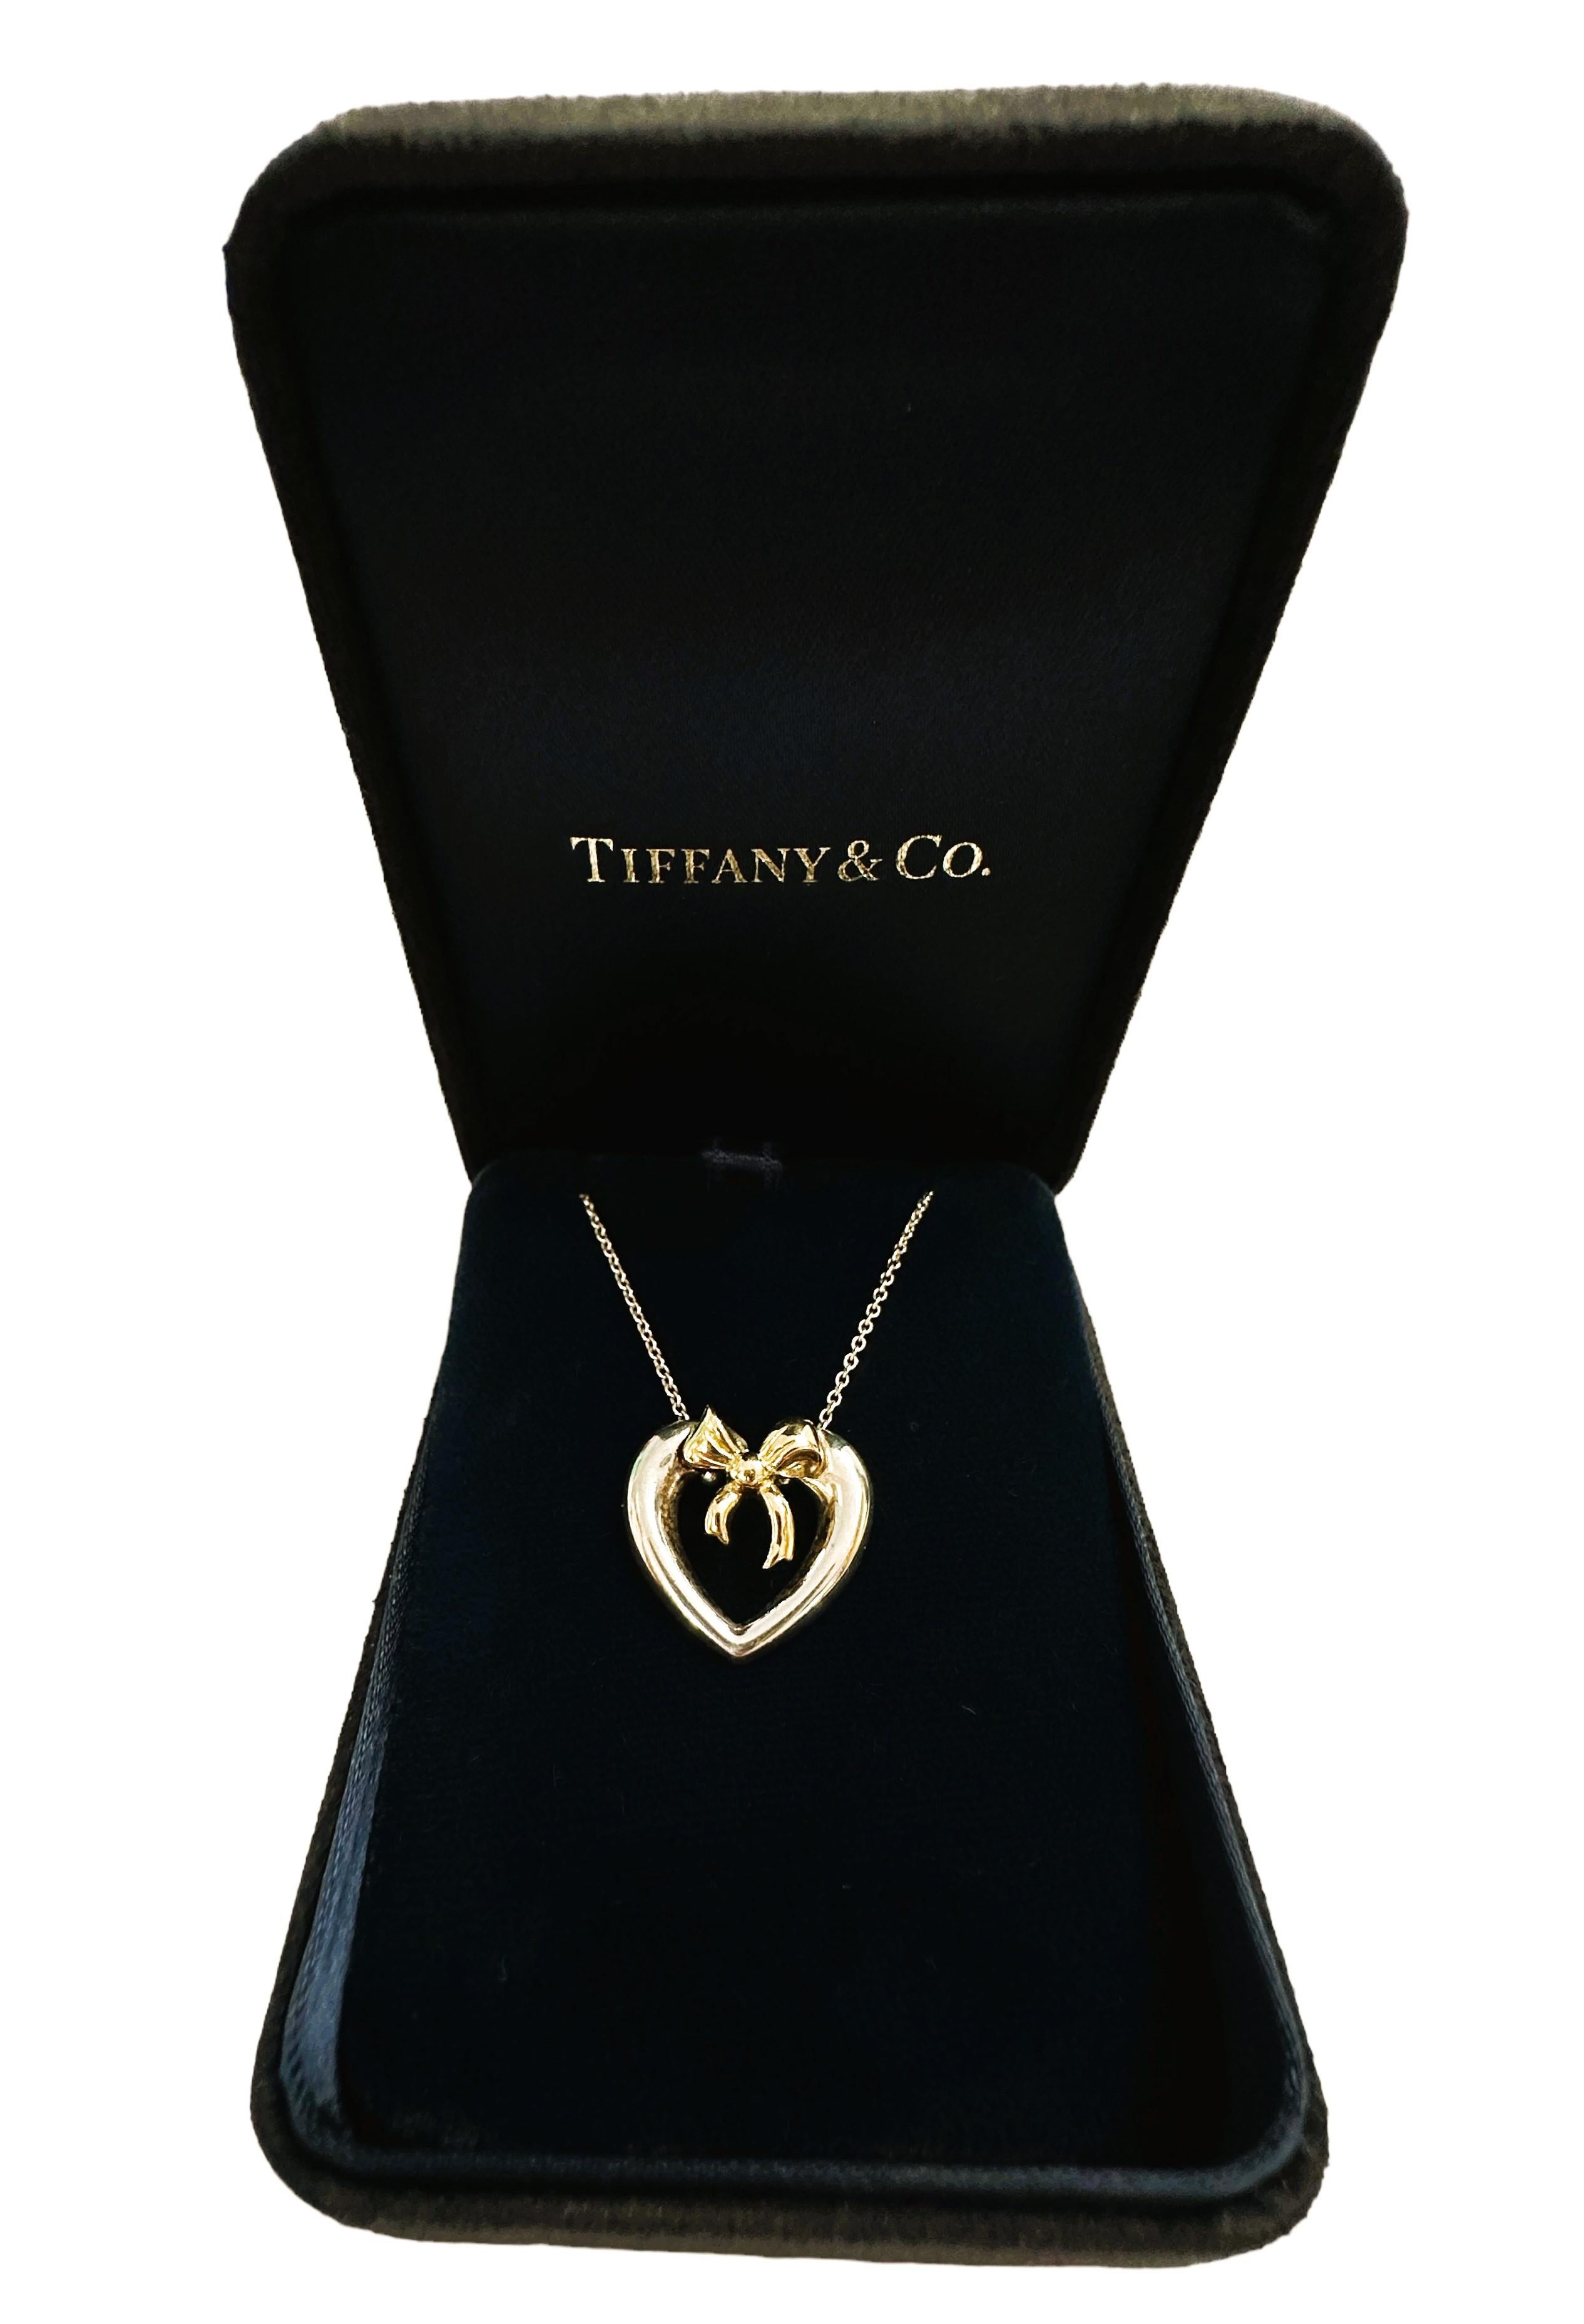 Vintage 1991 Tiffany & Co. 18K Gold Bow Sterling Silver Heart Necklace 5